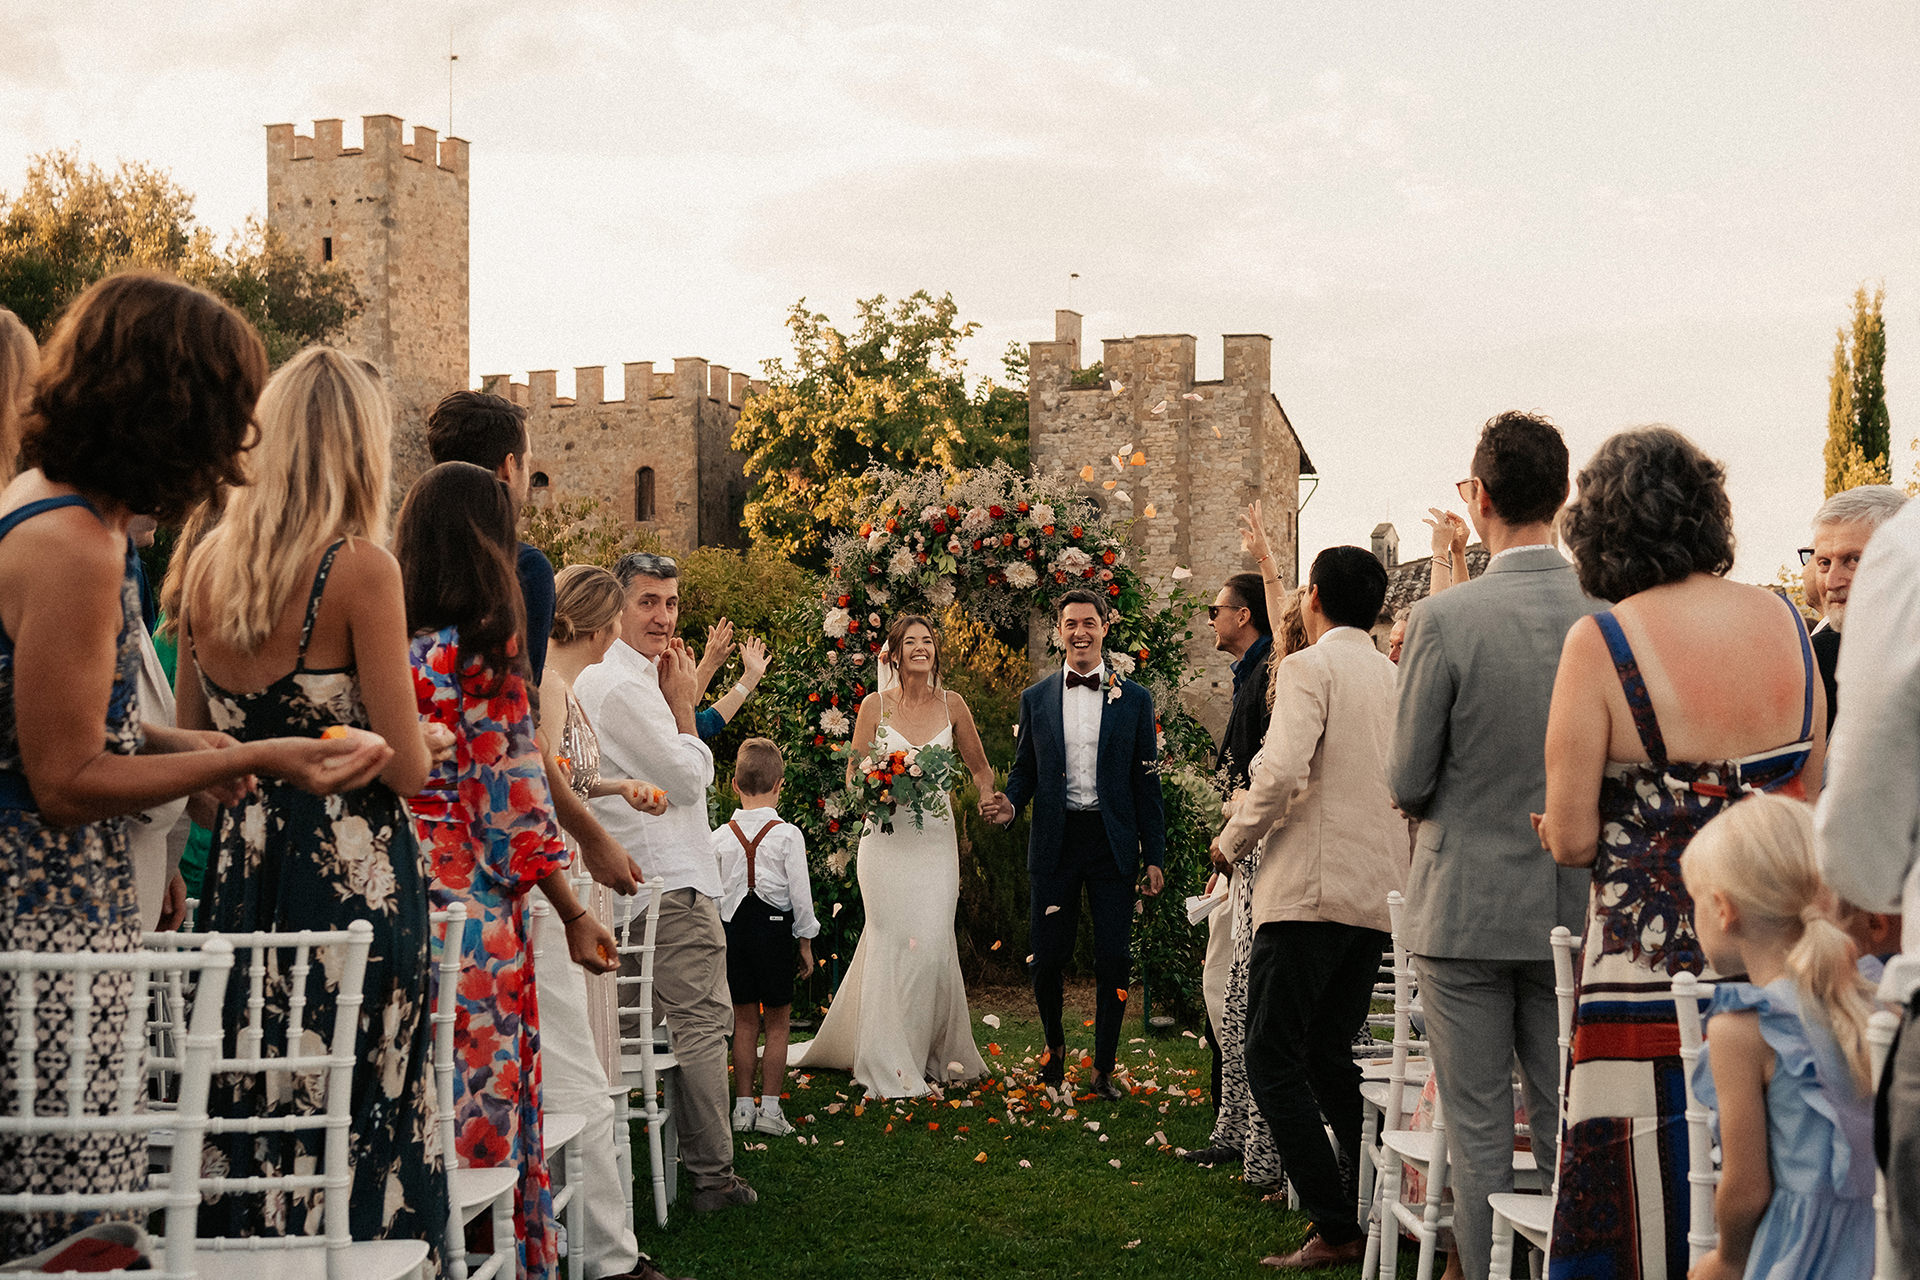 Wedding photography and videography in Italy